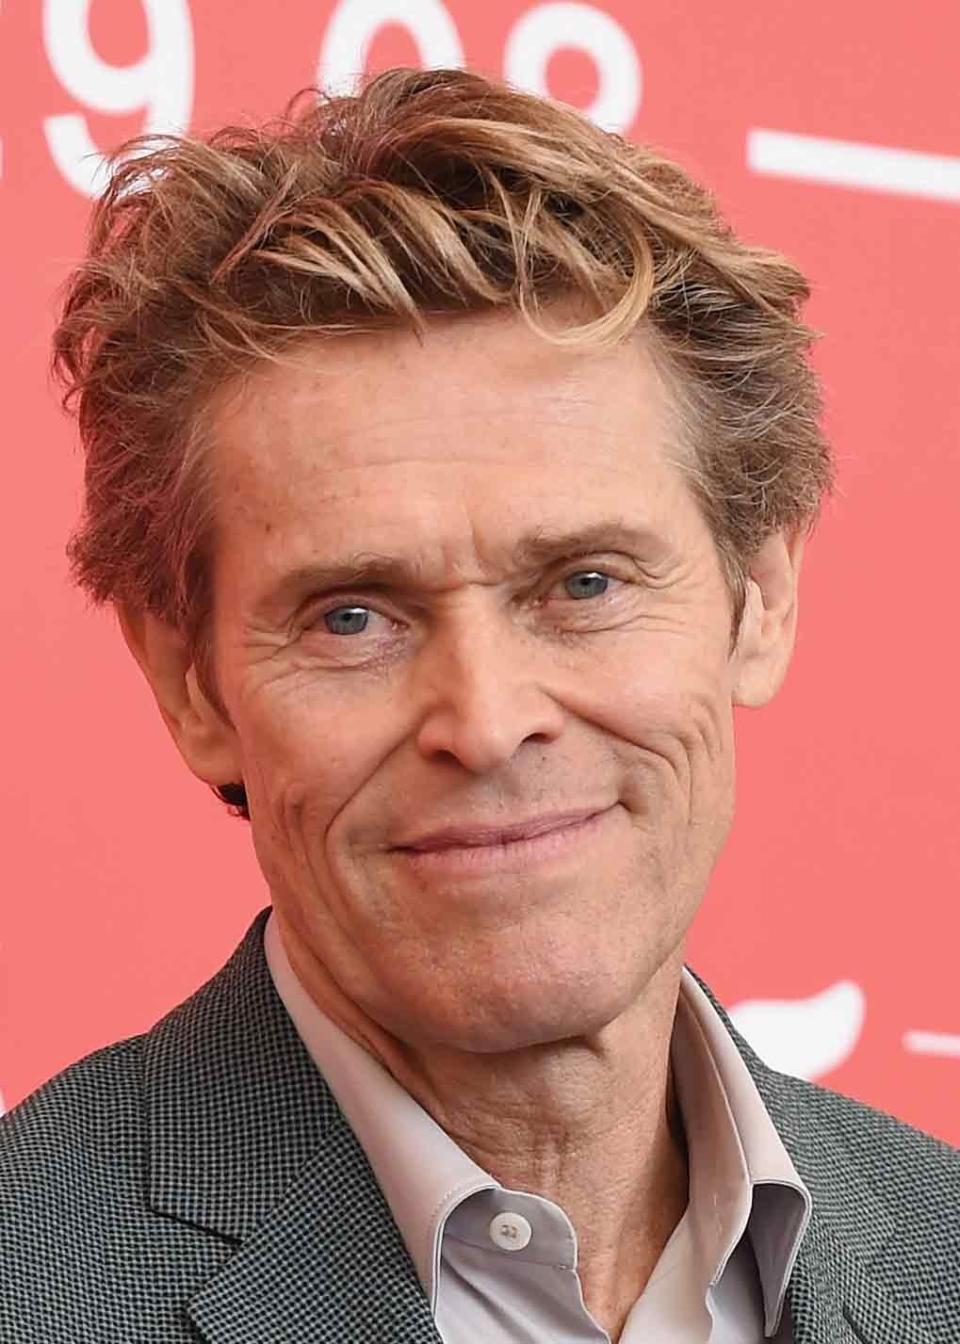 Willem Dafoe’s "I'm on a Boat" Hair